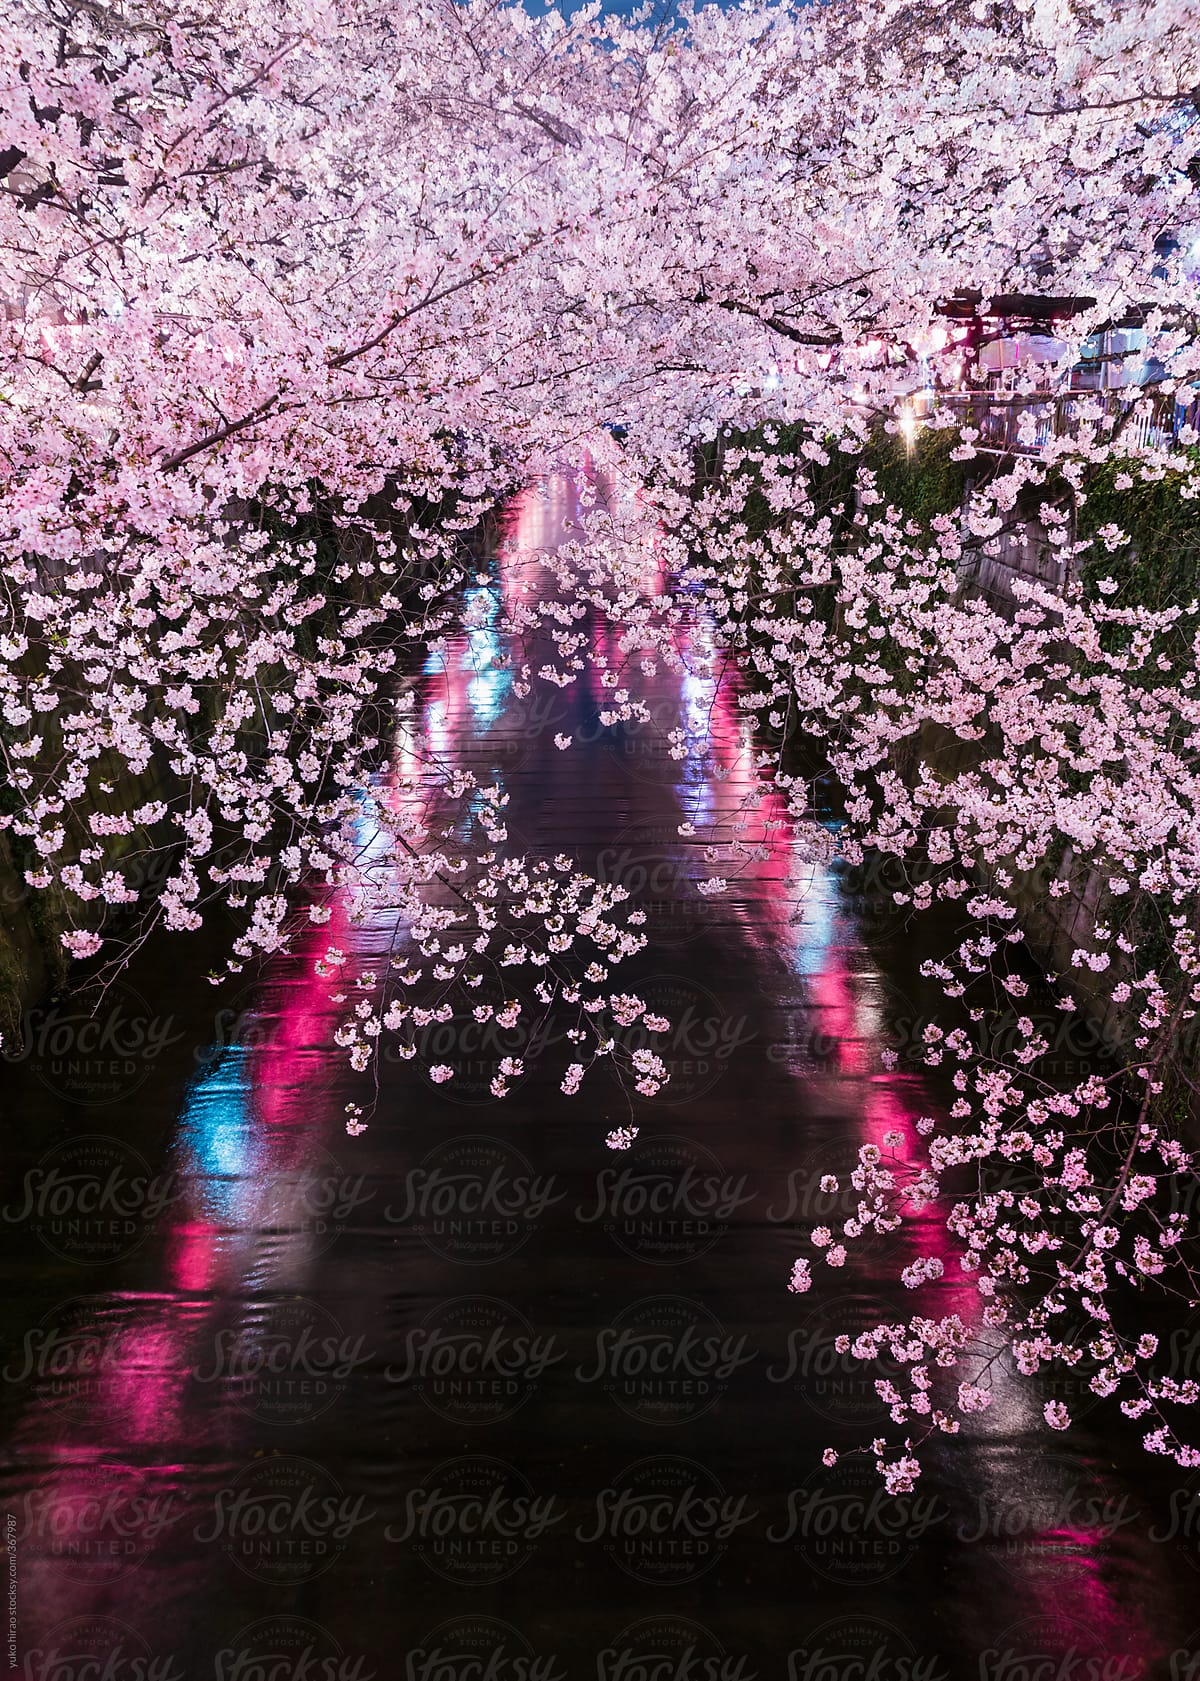 Japanese cherry blossoms at night over Meguro River